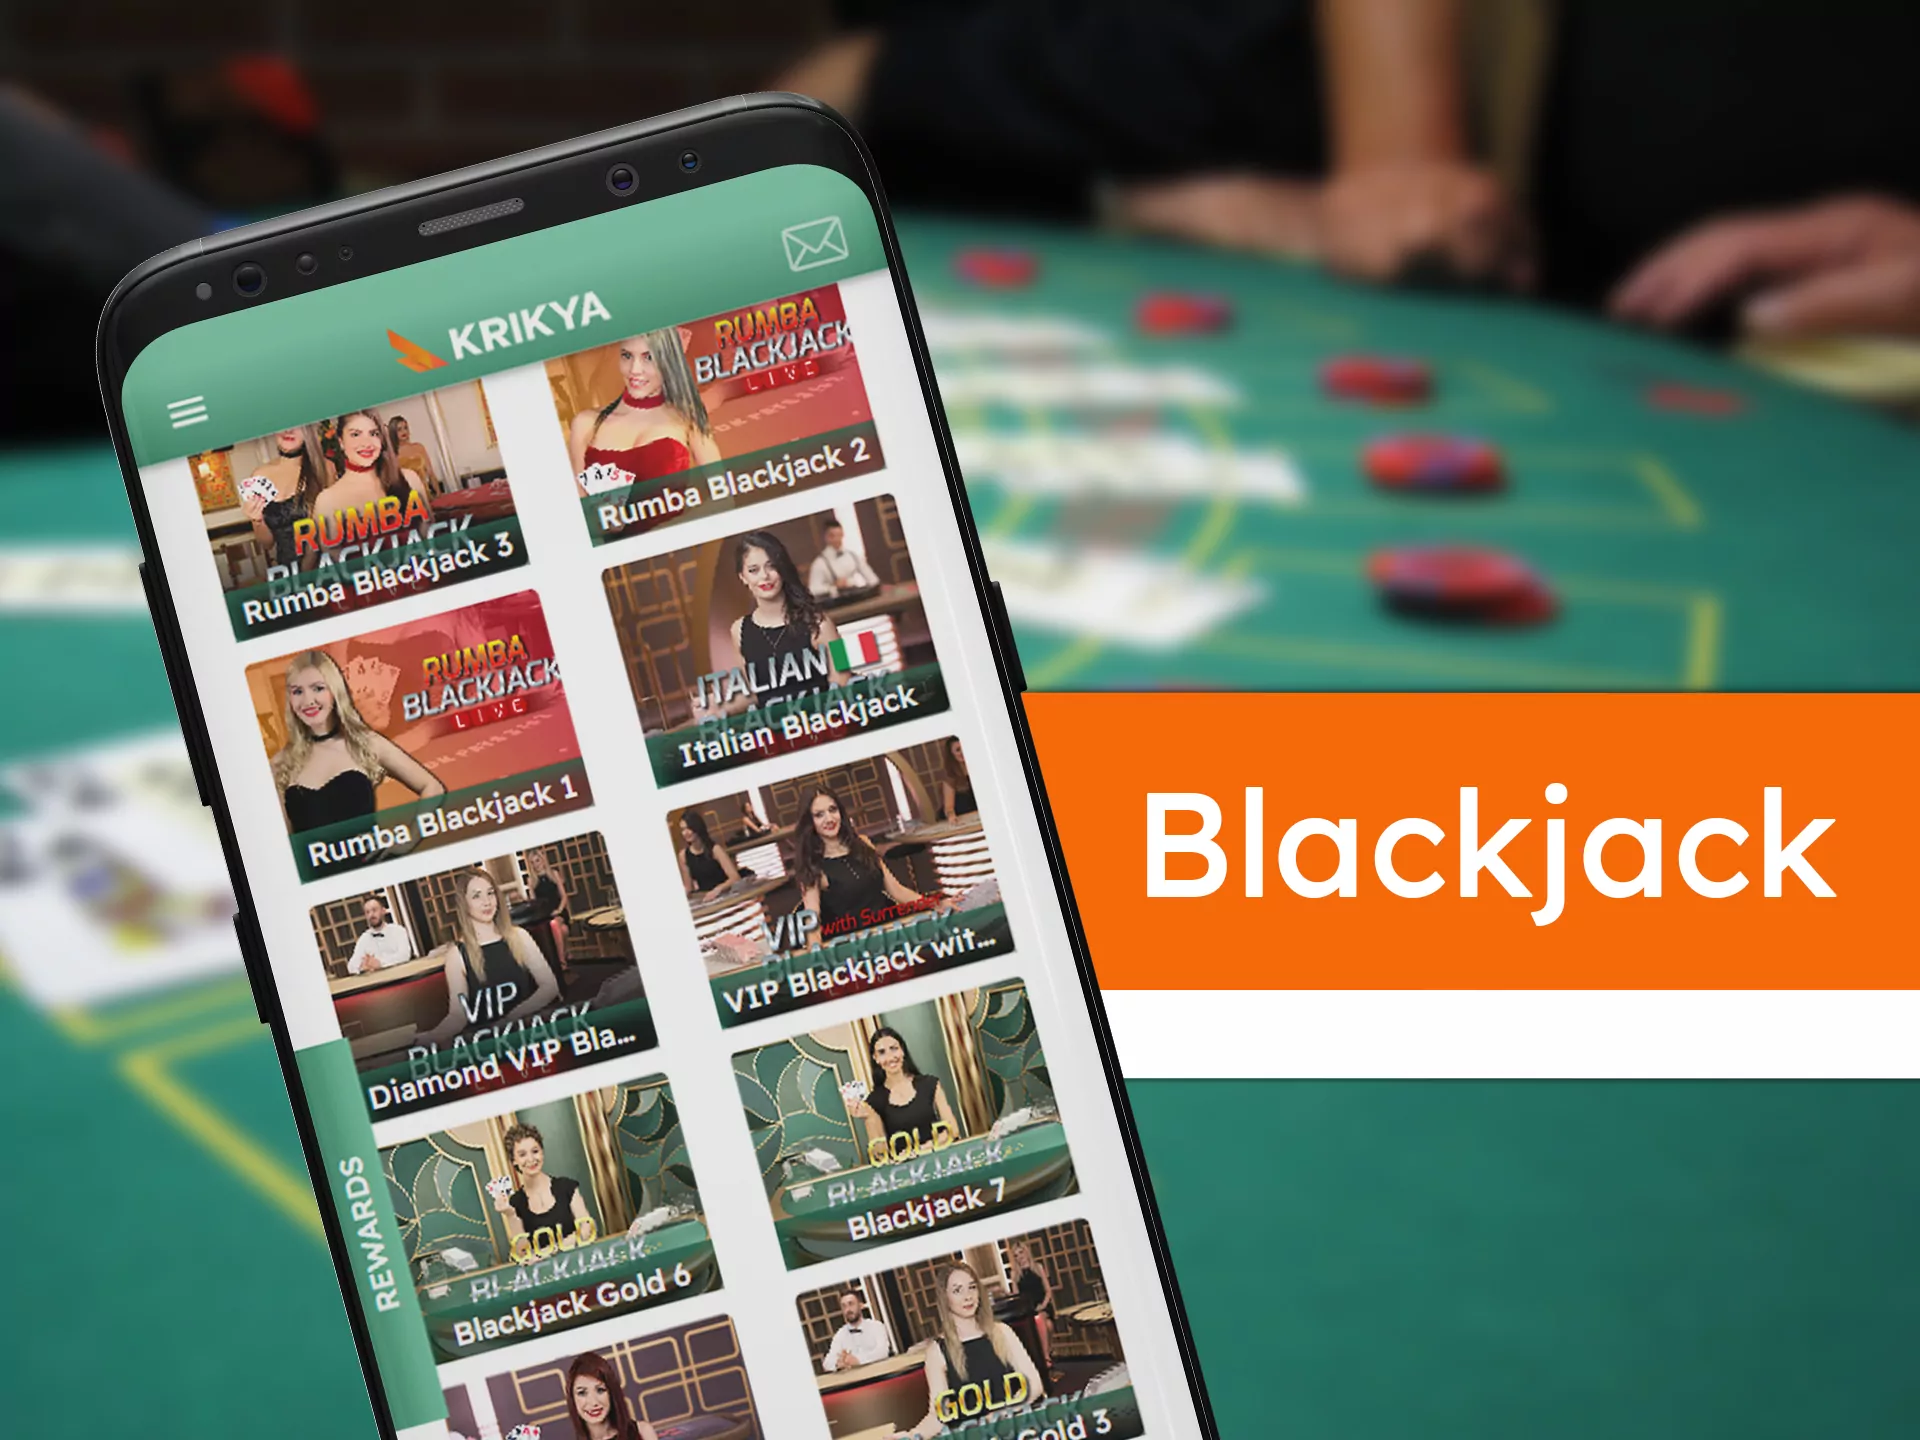 Choose your favourite blackjack table and play on it with Krikya app.